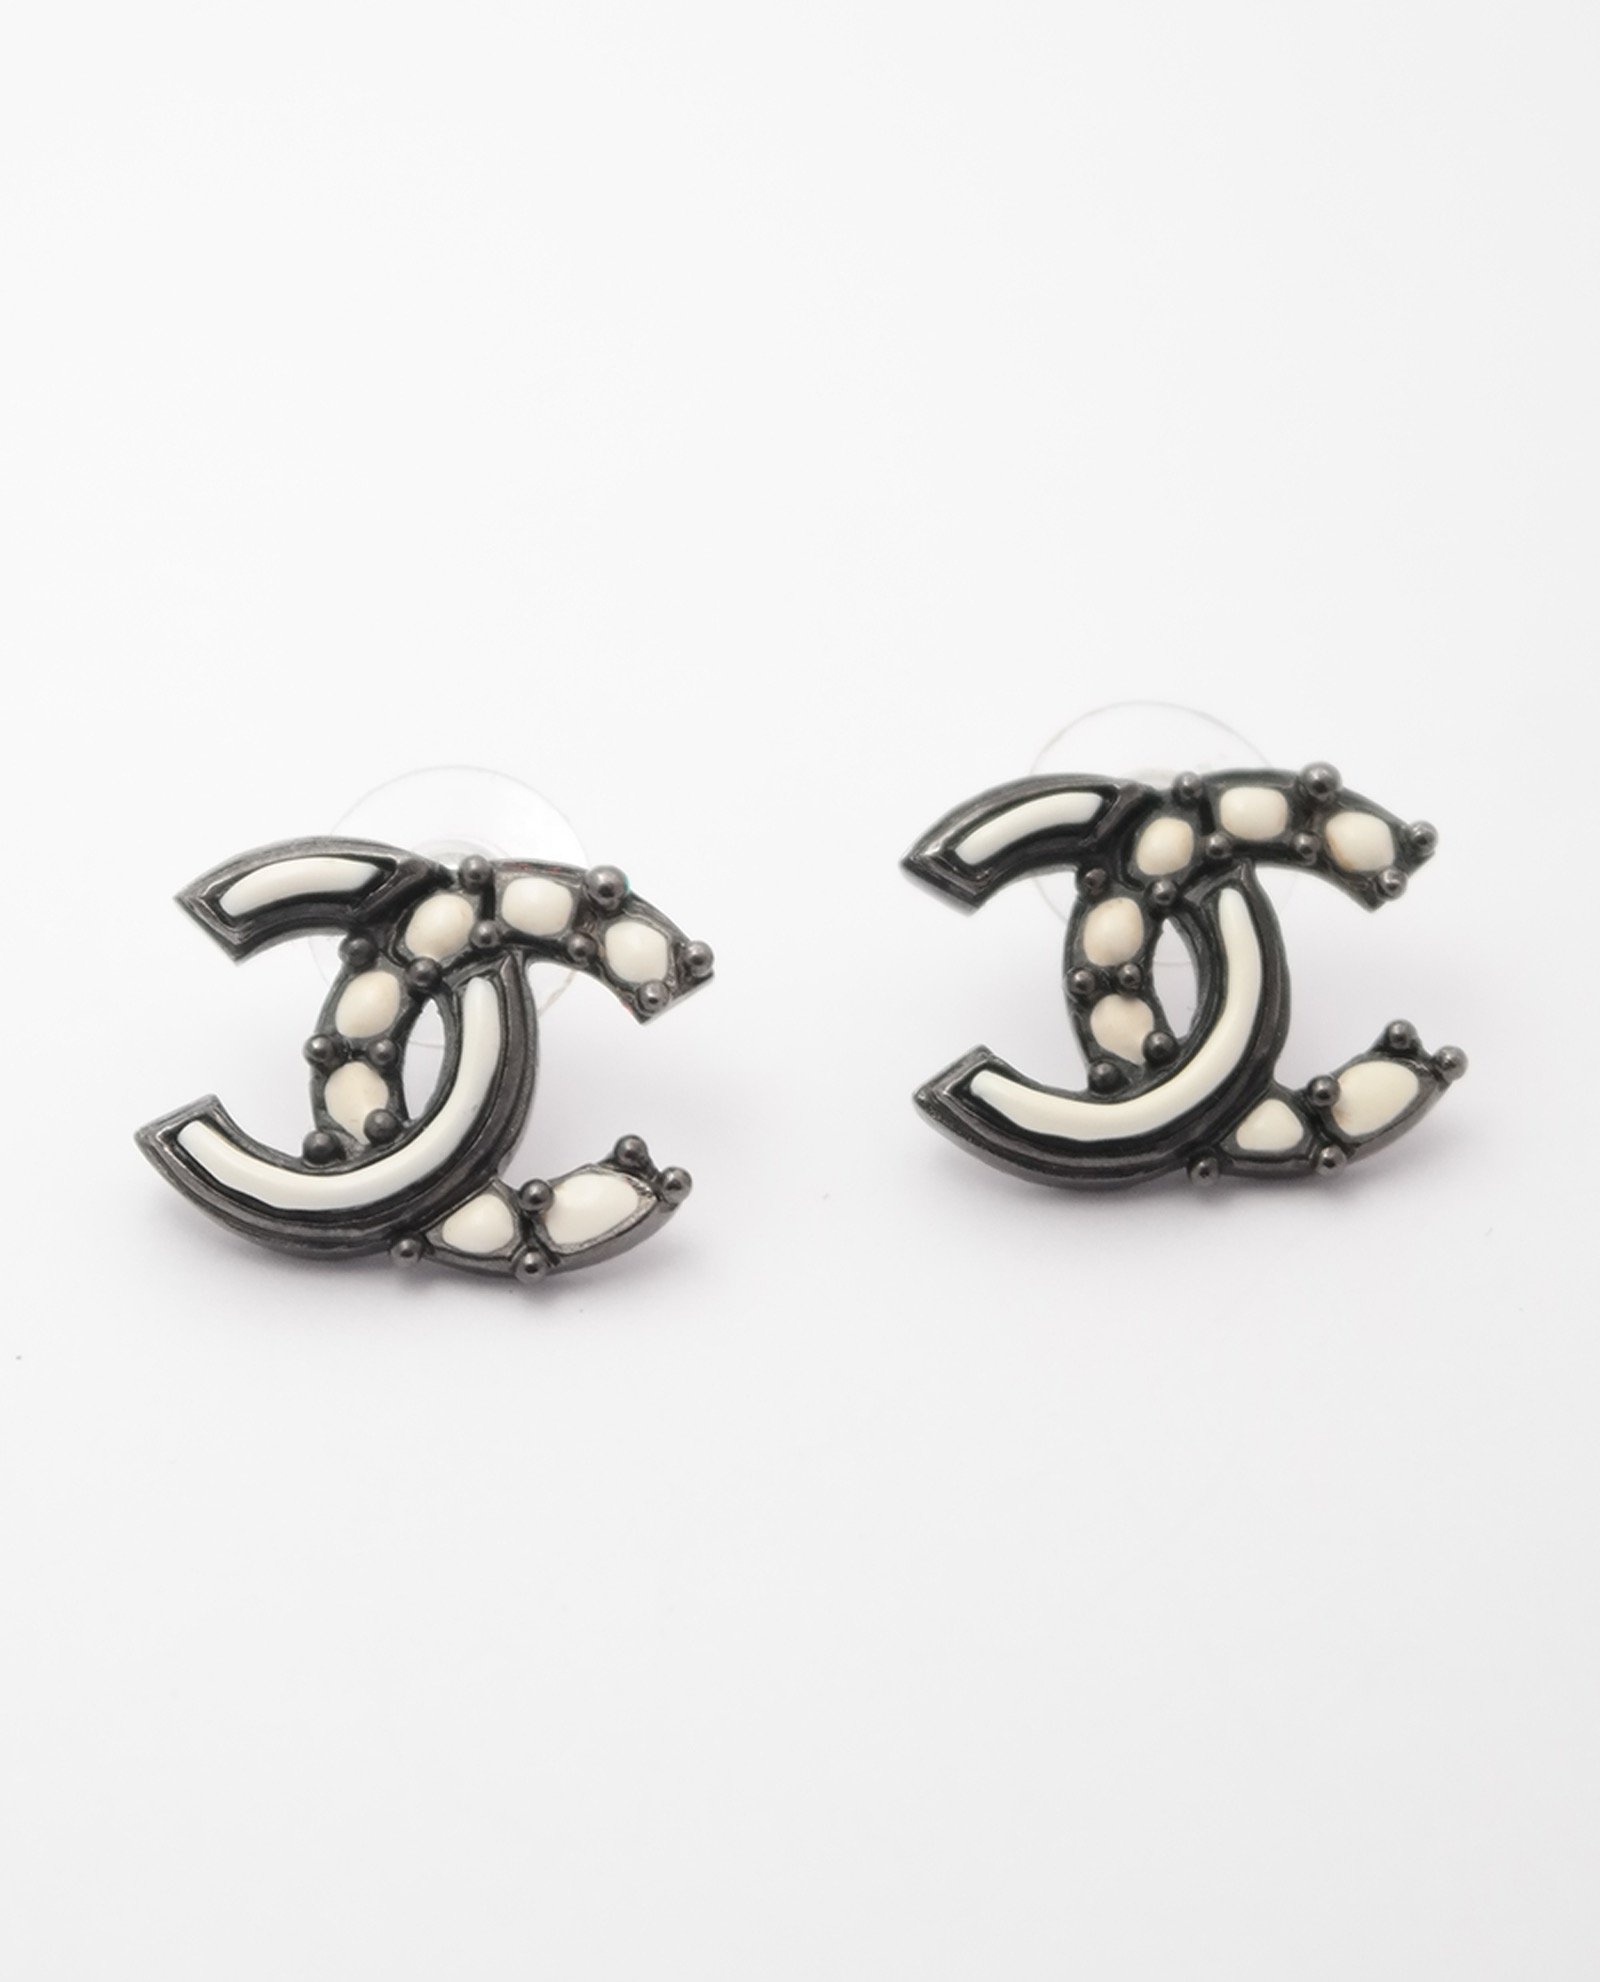 Chanel Earrings Black And White